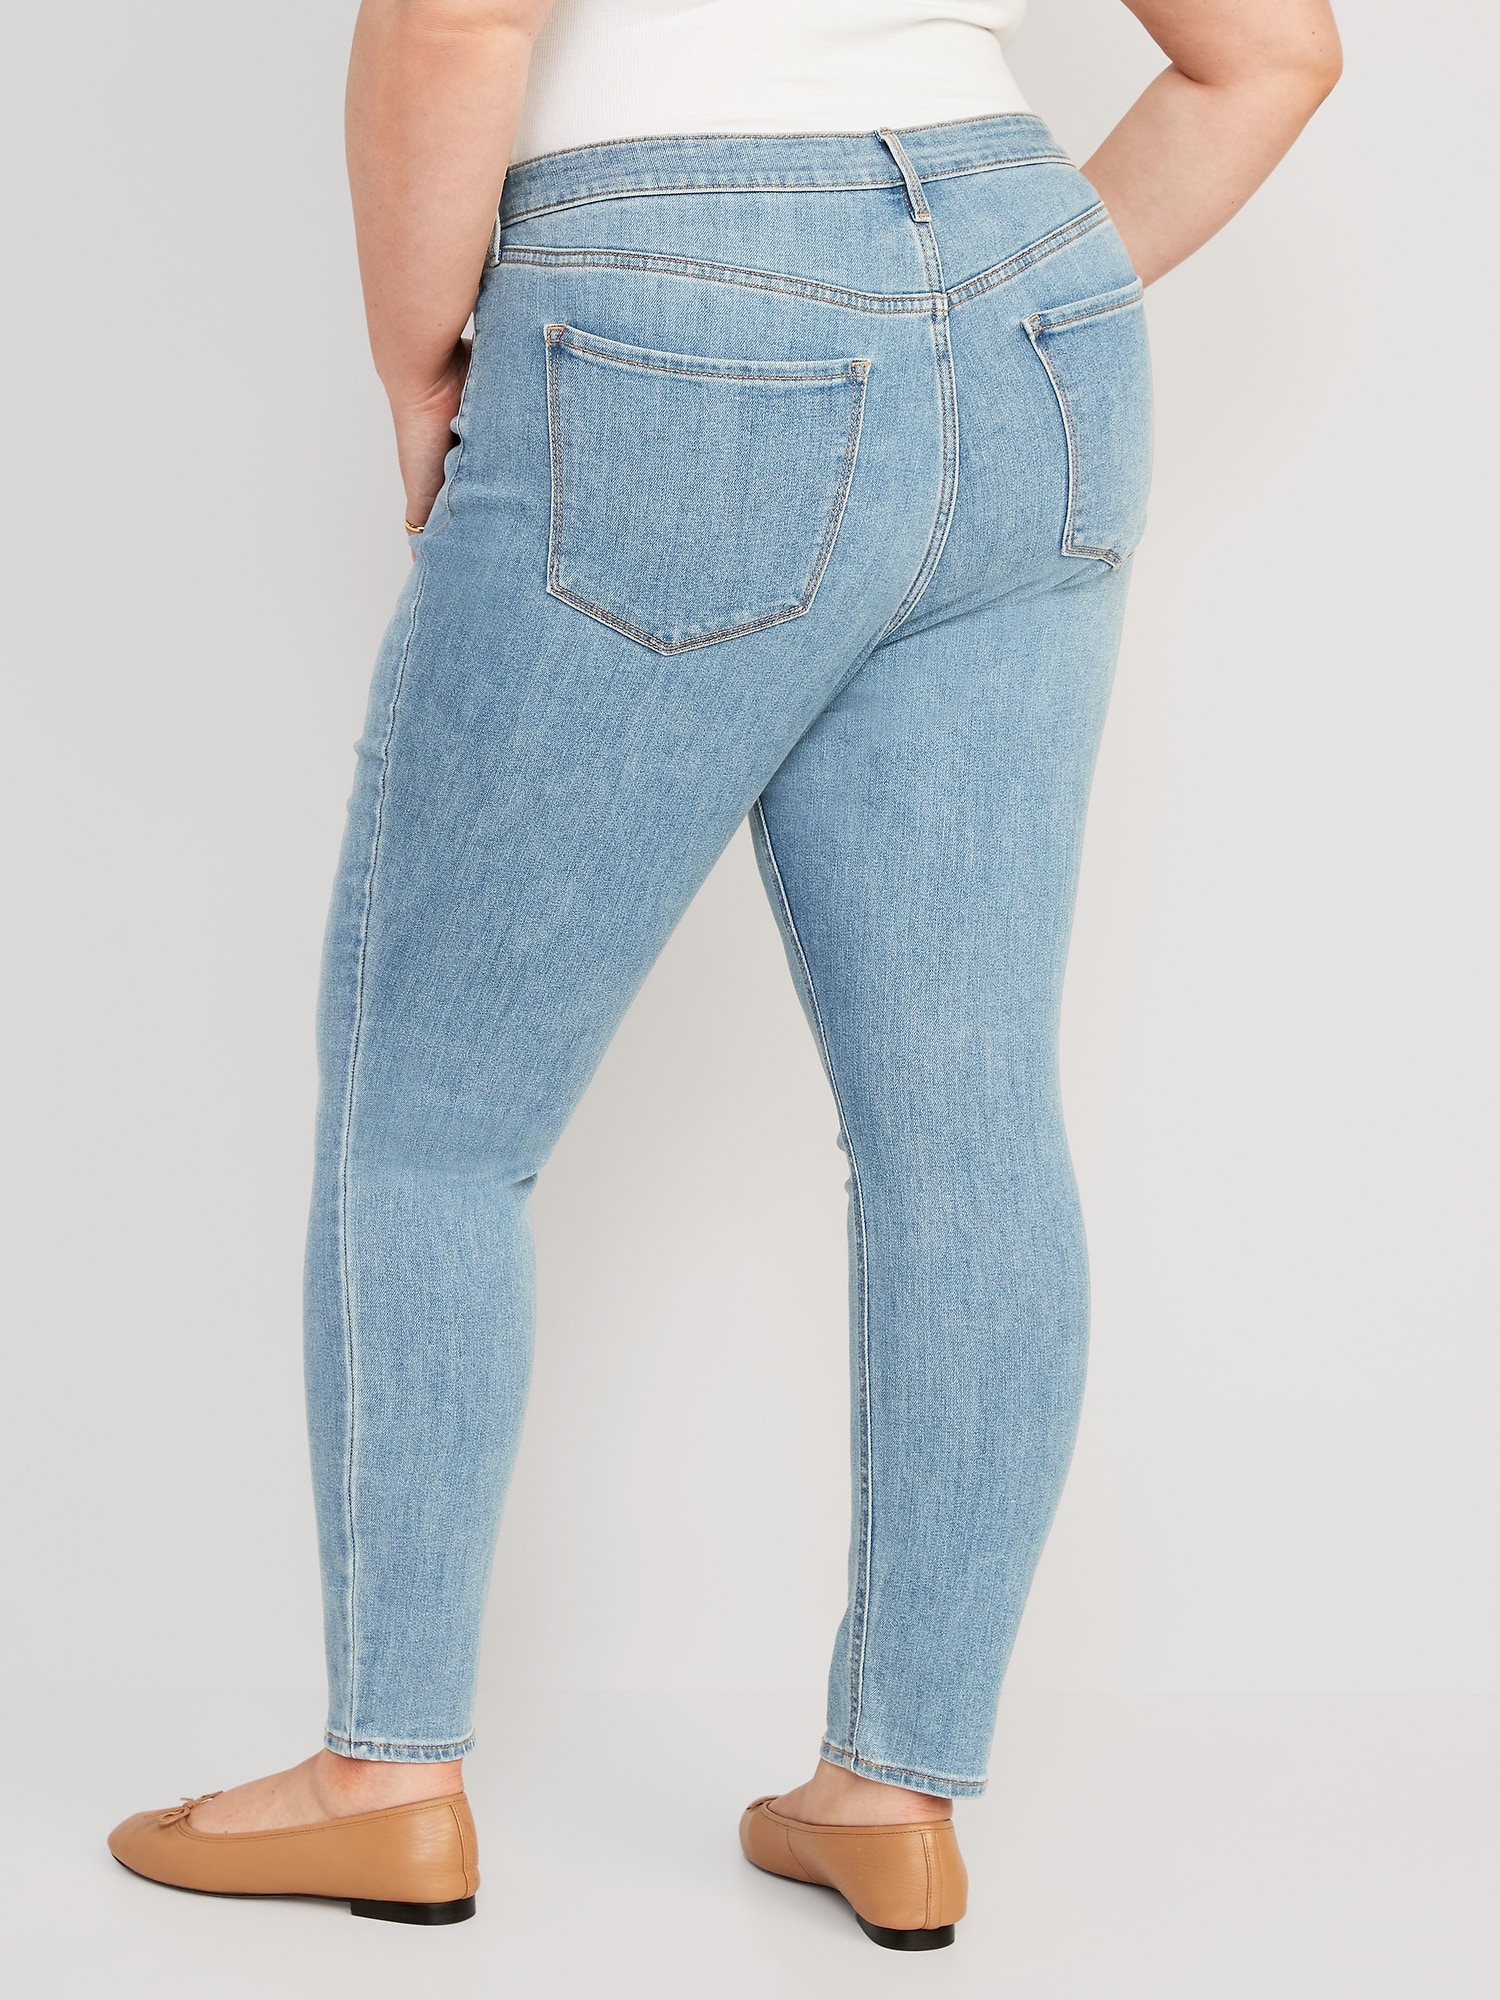 New Women High Waisted Skinny Jeans Pants Size 6 8 10 12 14 